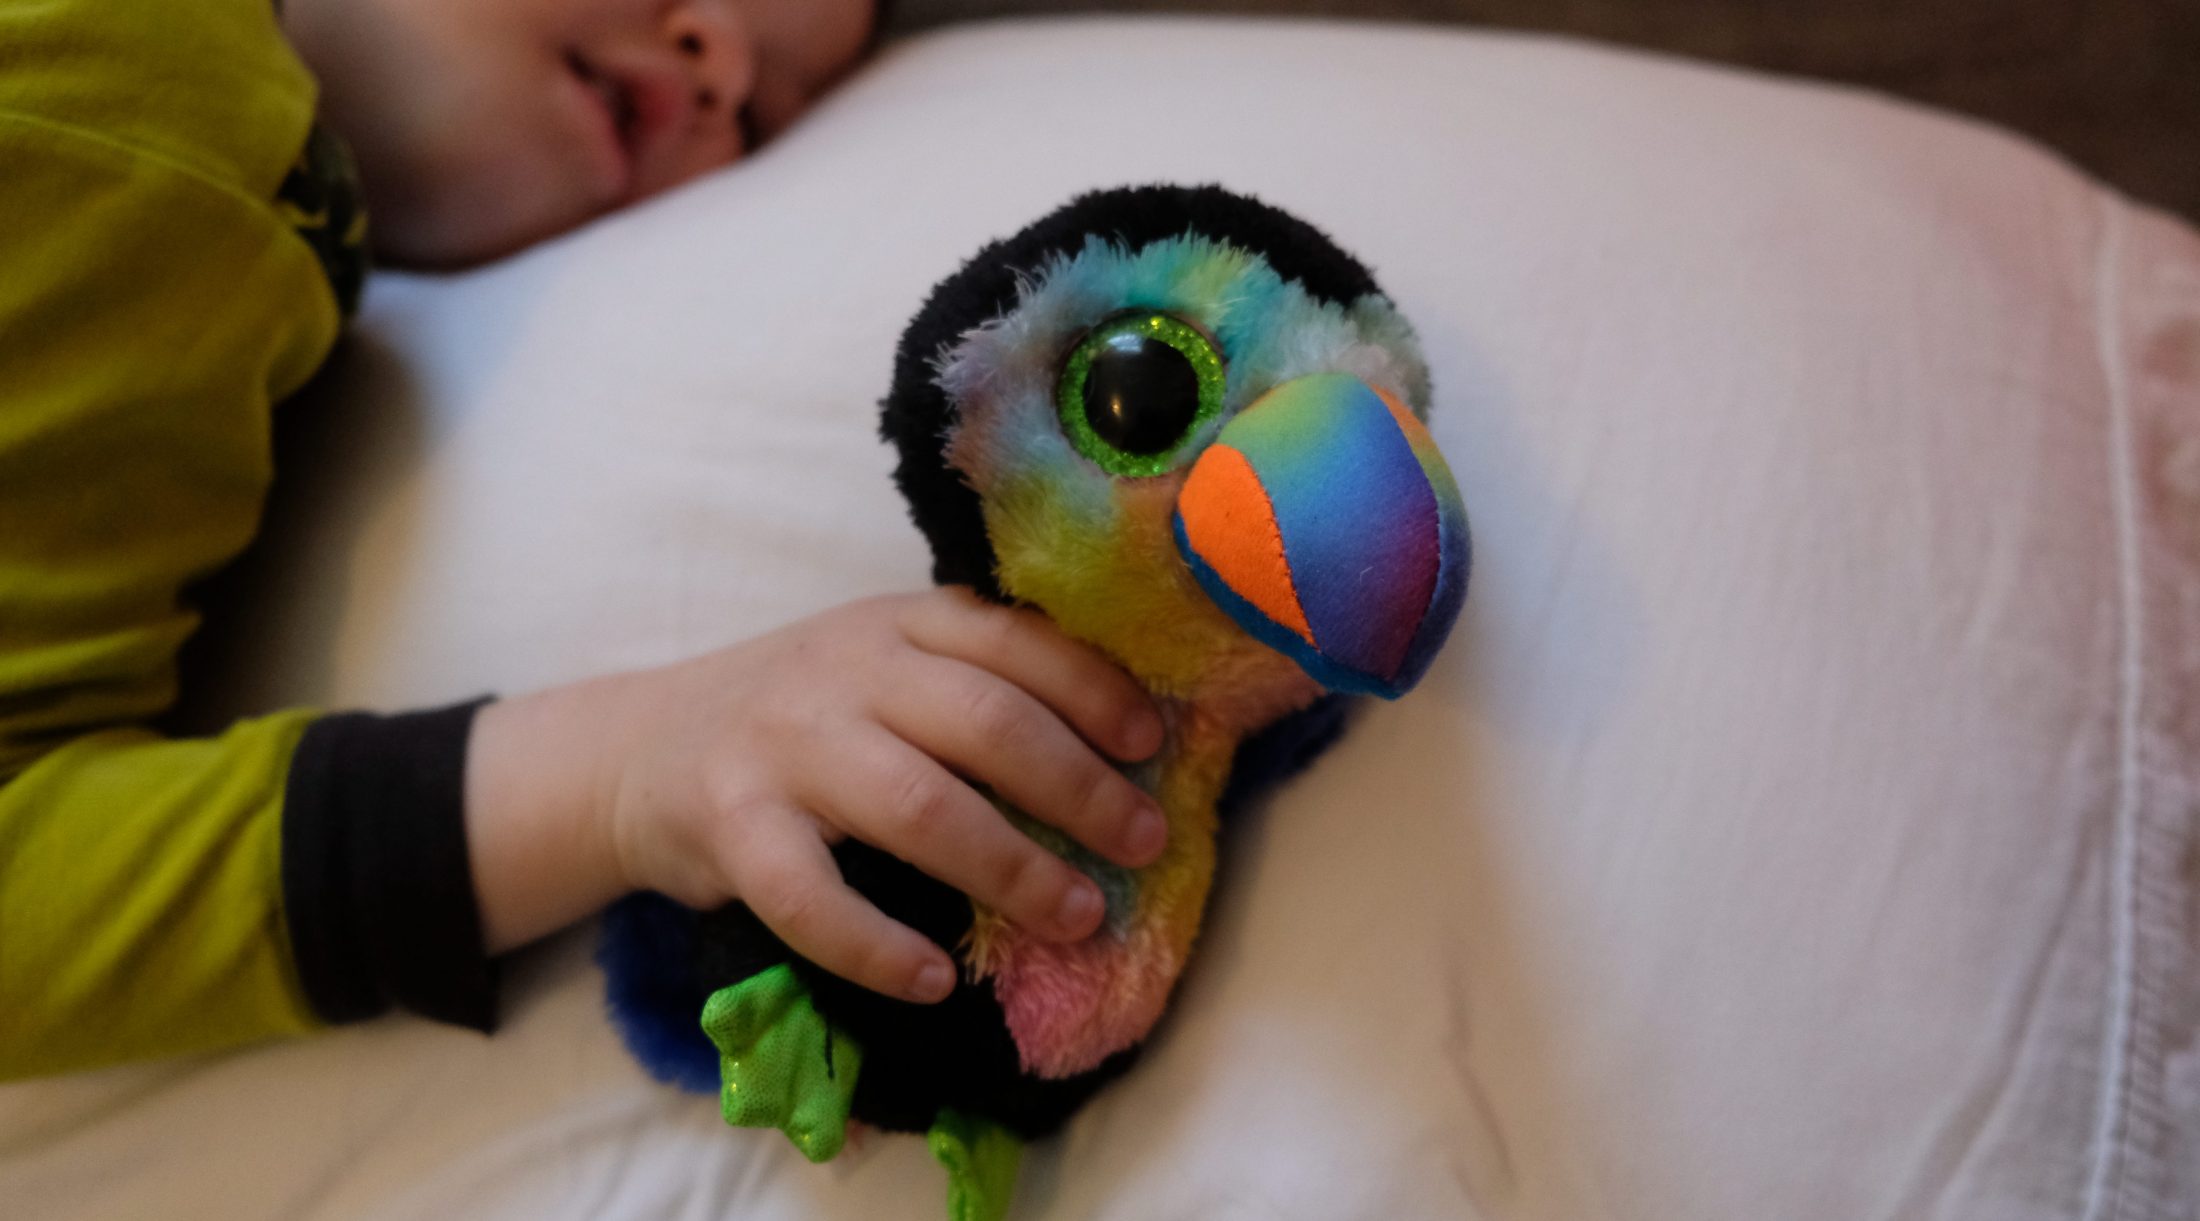 DC widow blog writer Marjorie Brimley's baby holds a stuffed parrot